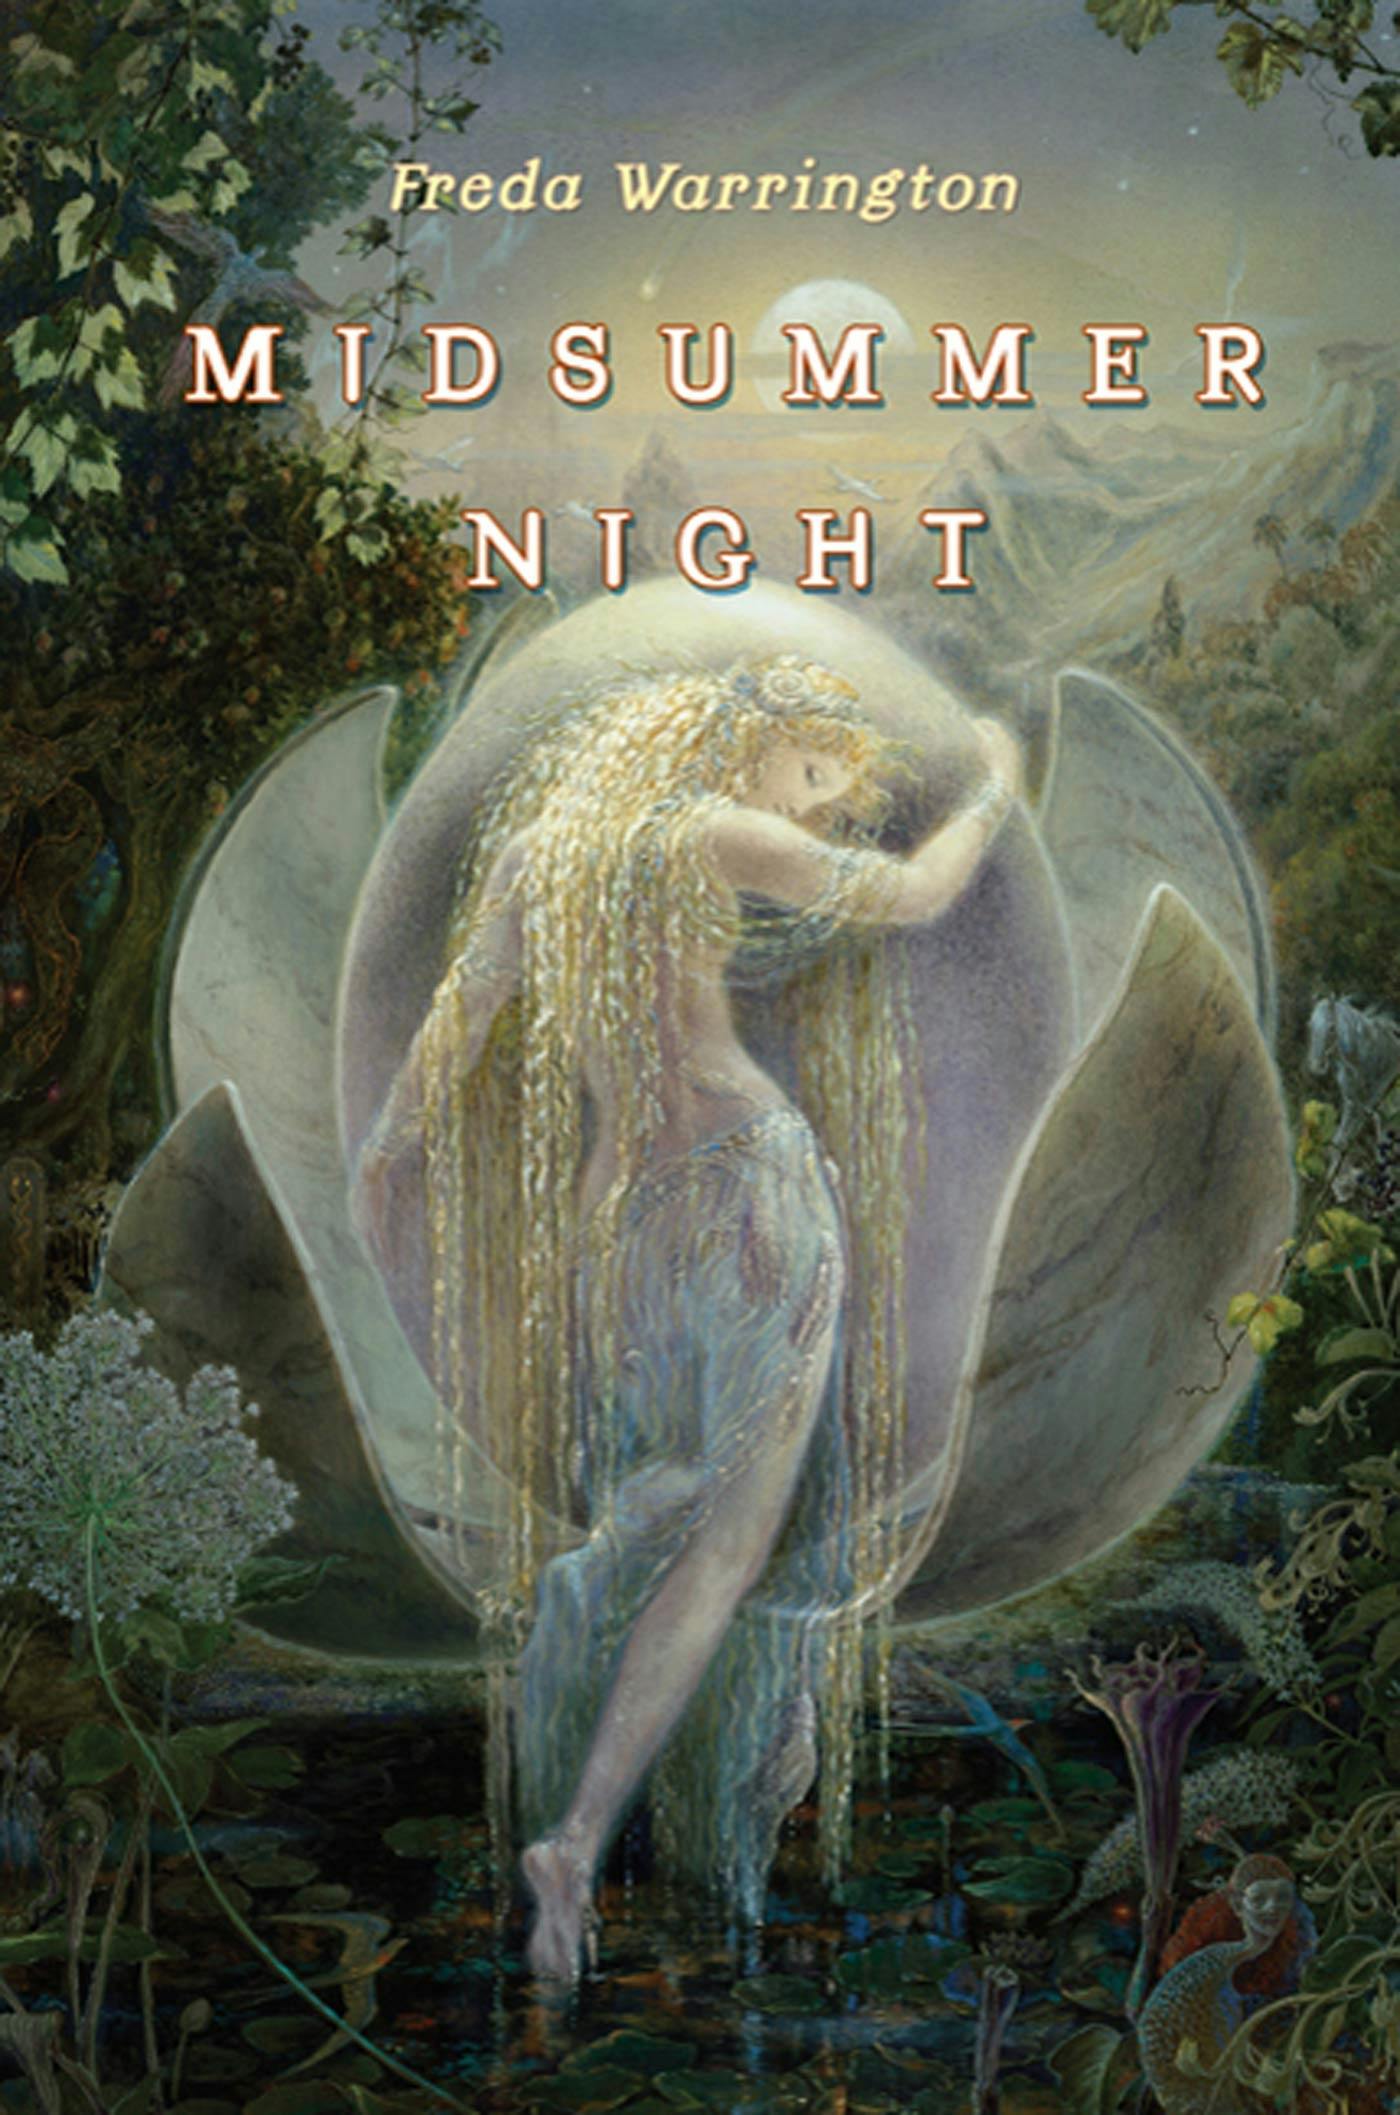 Cover for the book titled as: Midsummer Night